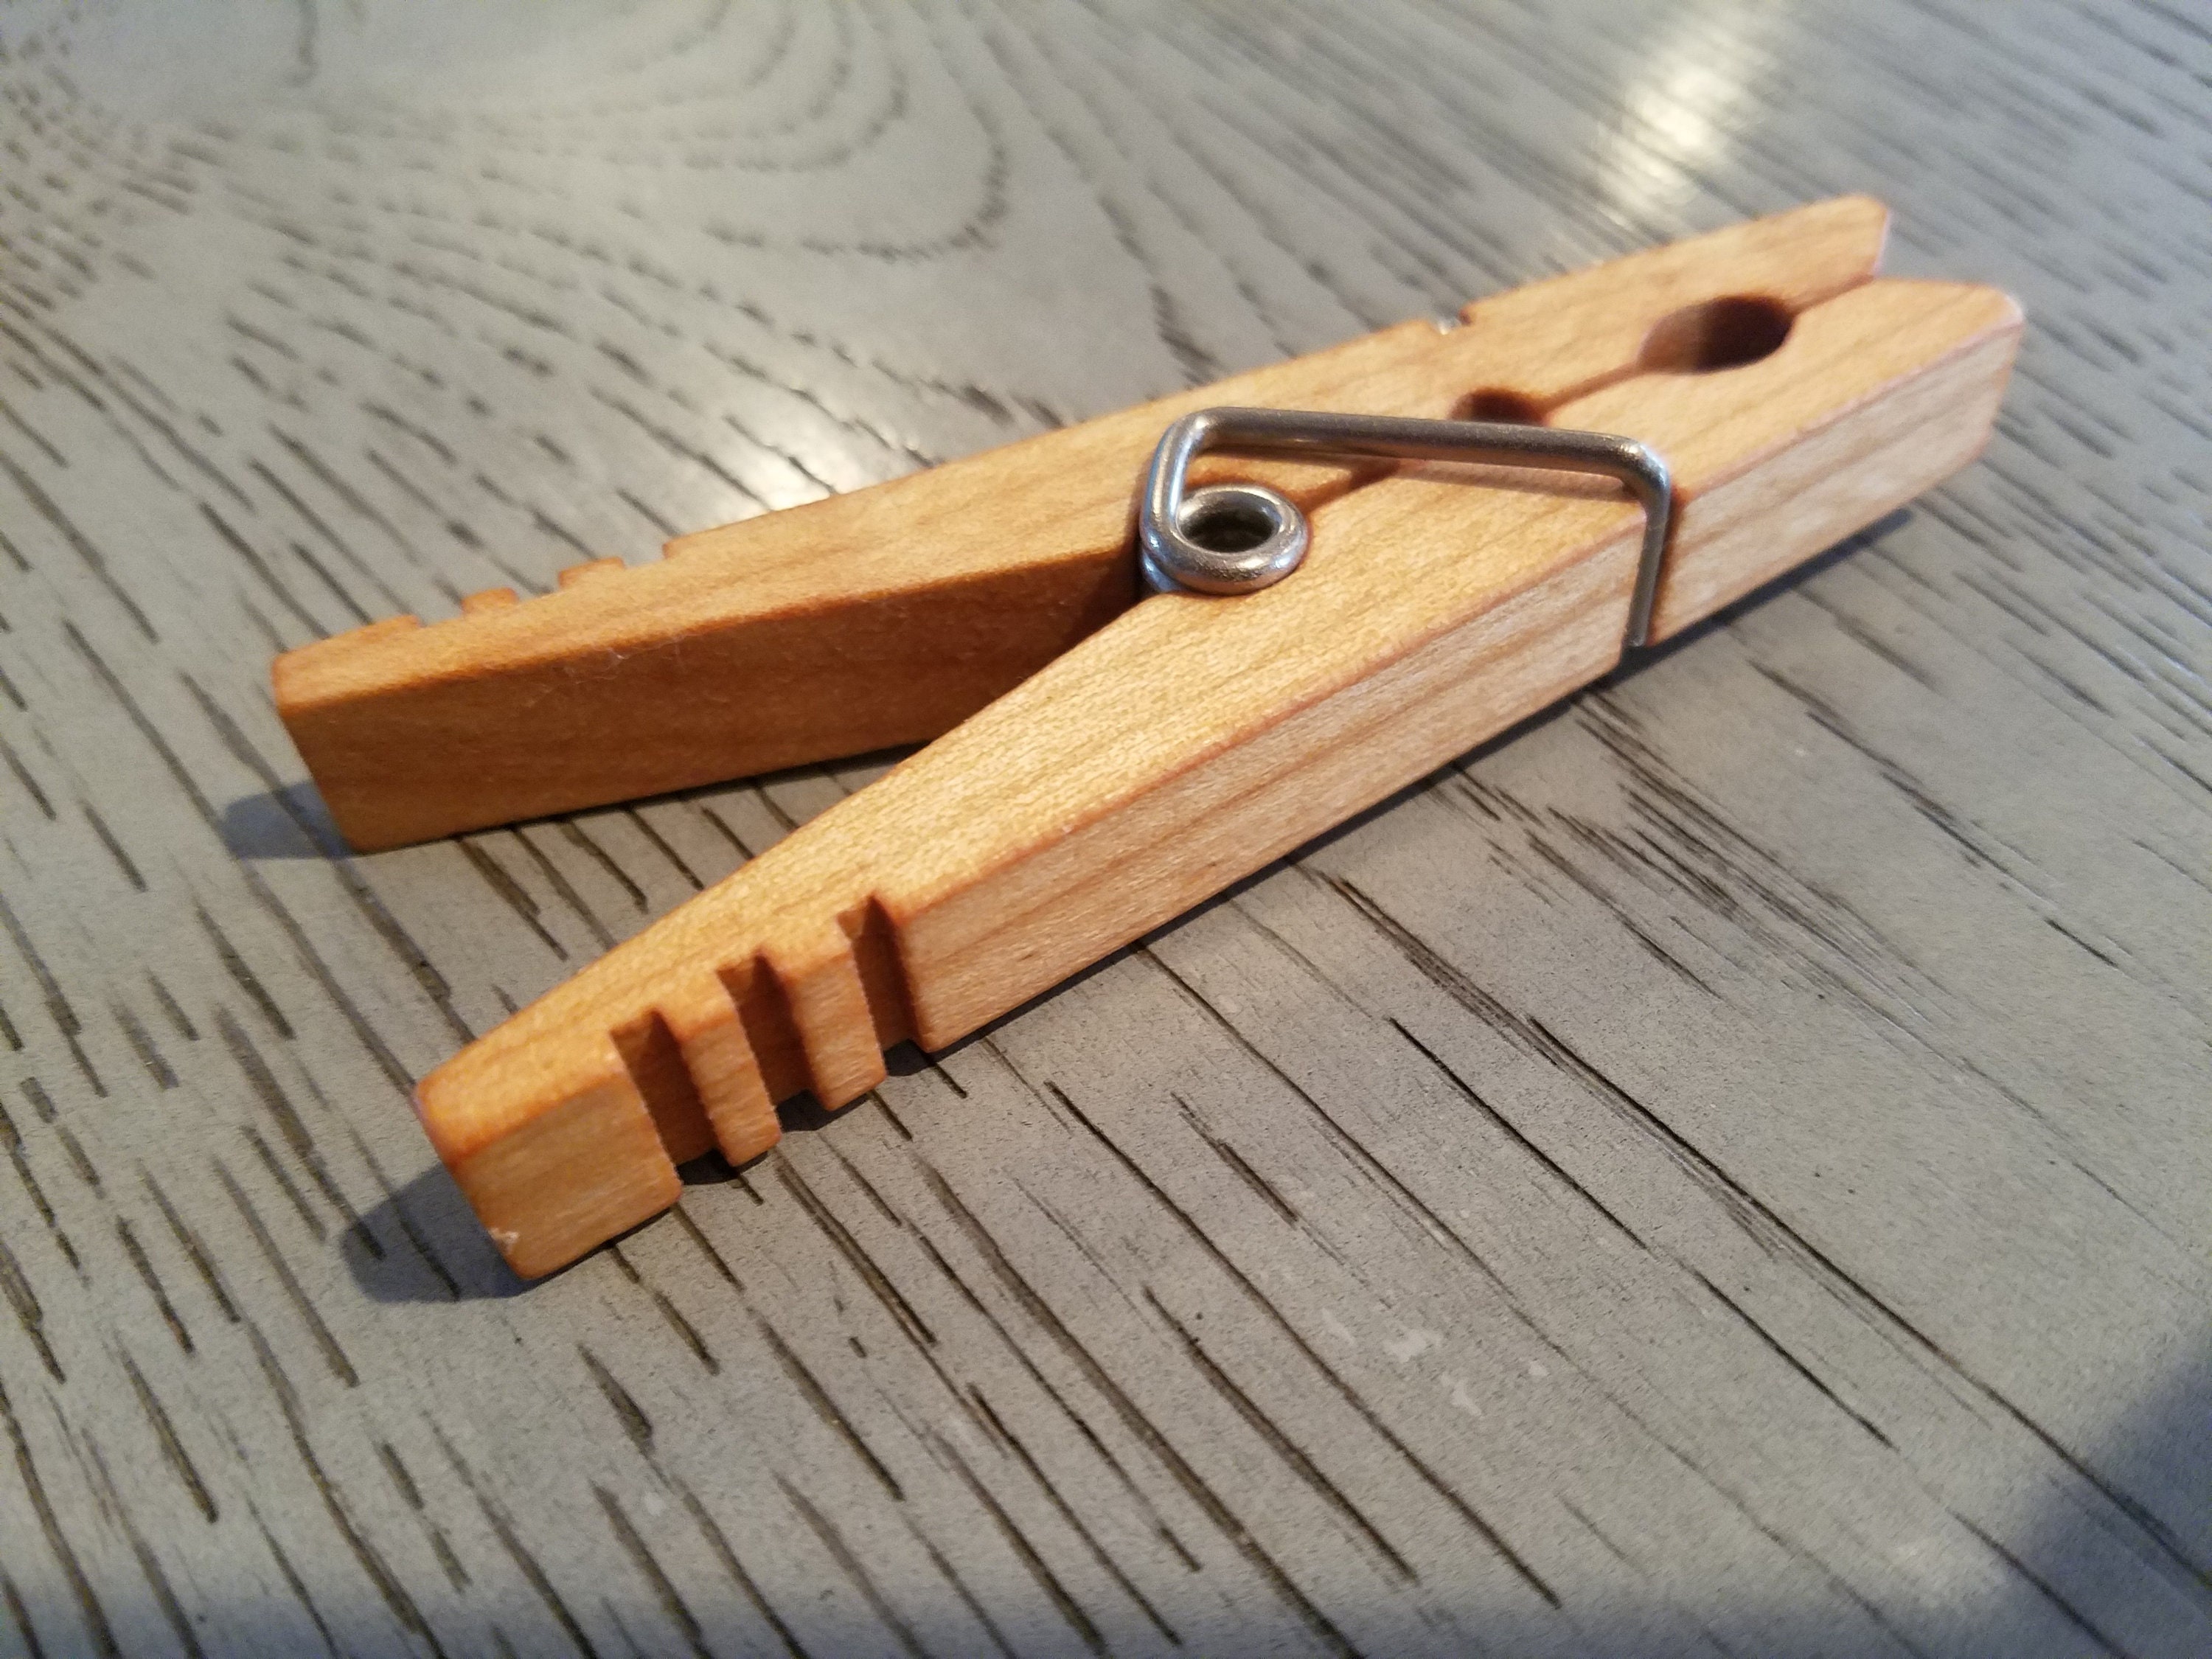 Wooden Clothes Pins Available Sizes: Large, Medium, Small, Extra